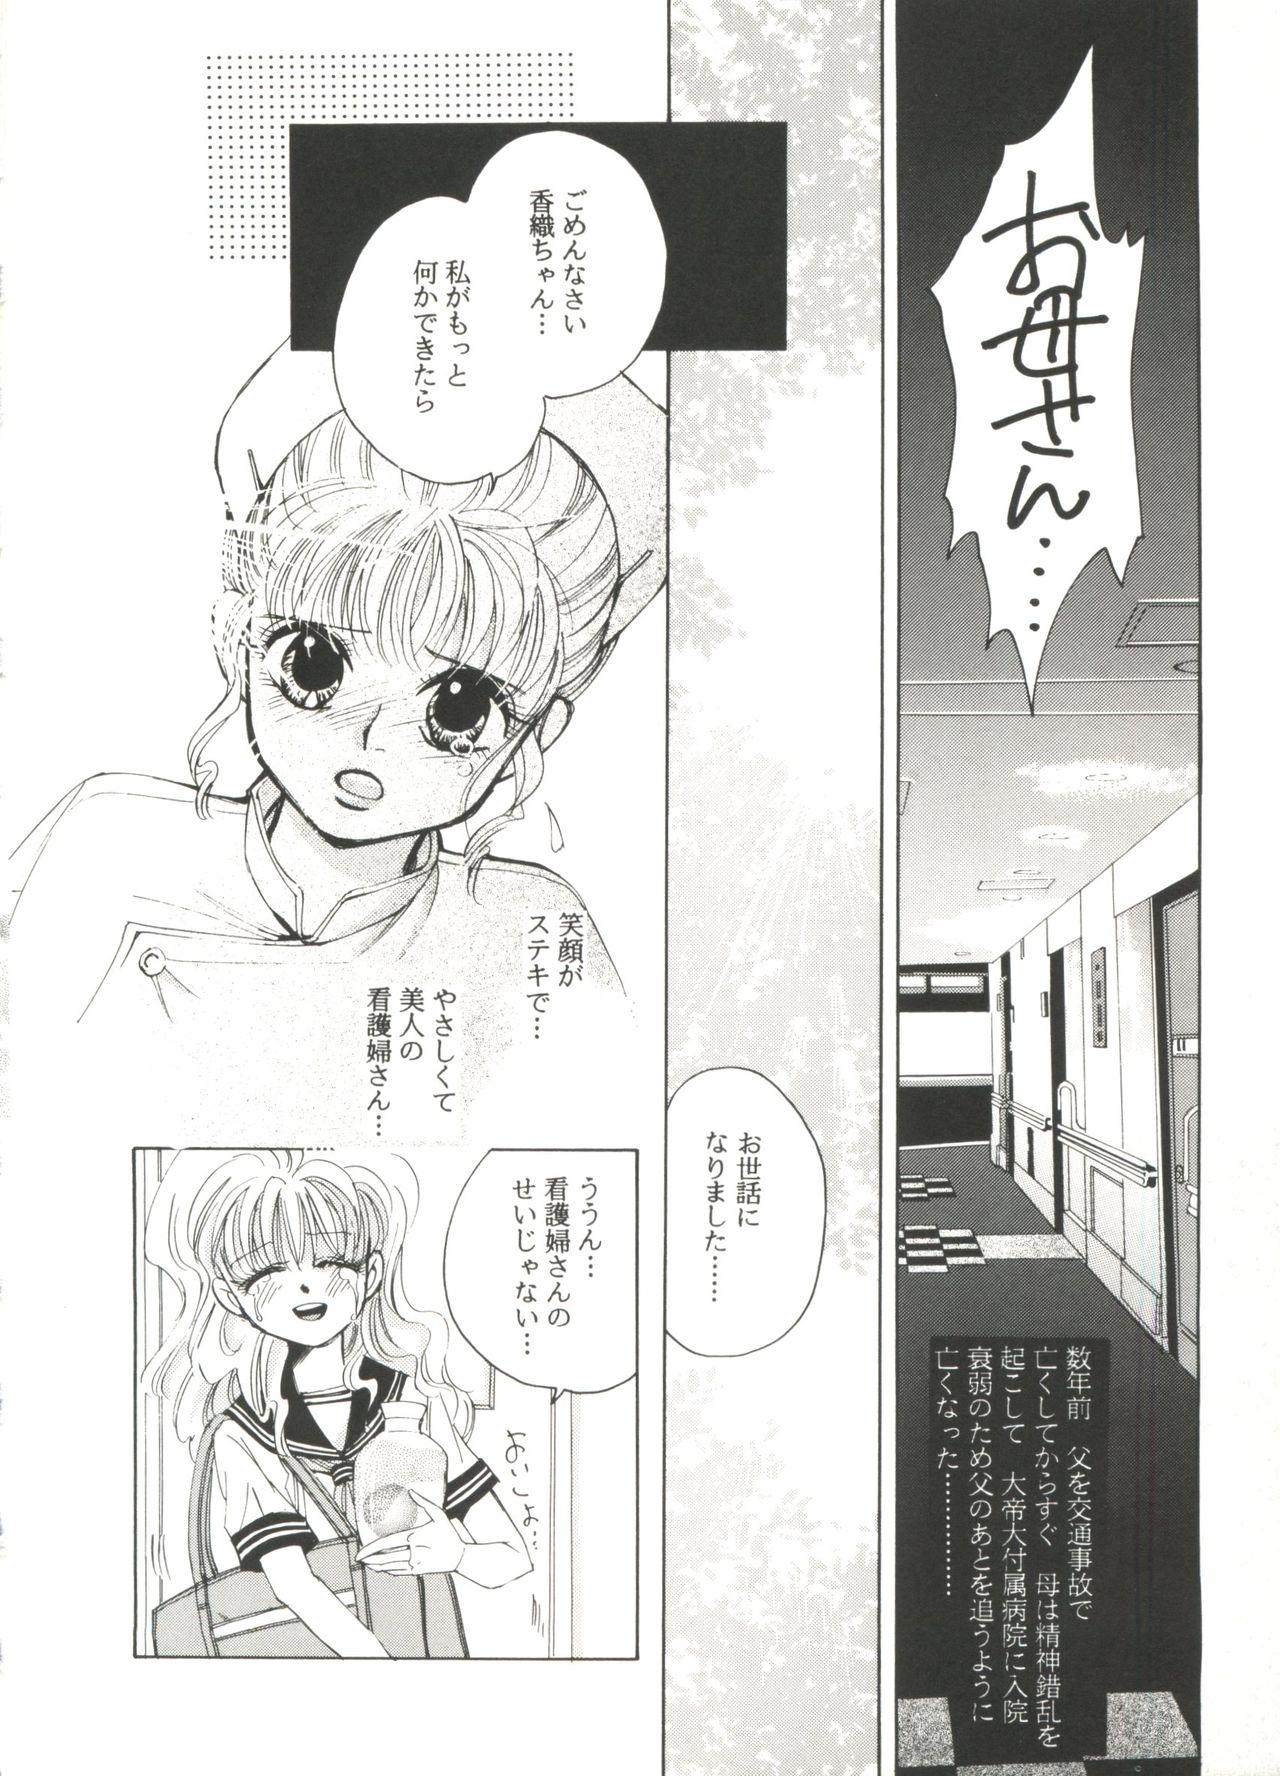 Secretary Doujin Anthology Bishoujo a La Carte 8 - Sailor moon King of fighters Magic knight rayearth Battle athletes Saber marionette Kodomo no omocha Gay Outinpublic - Page 8